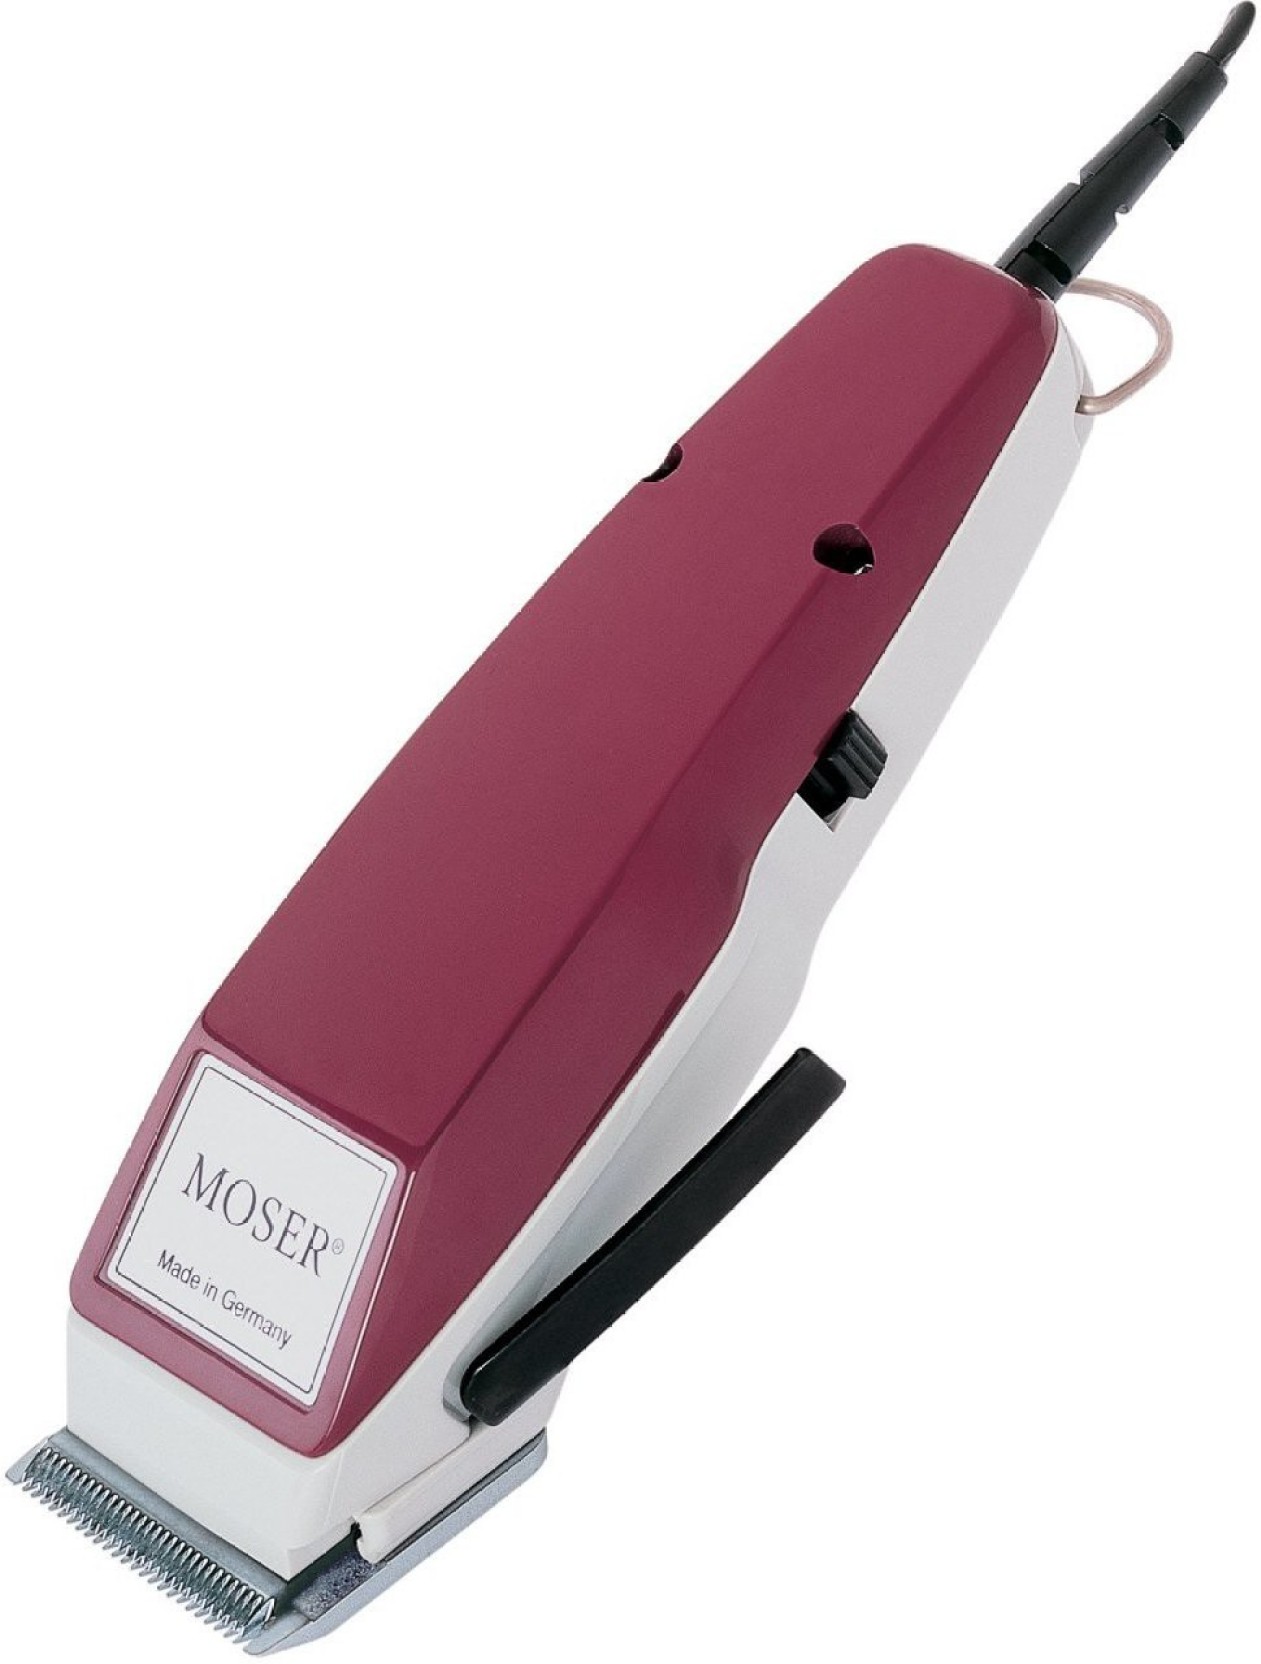 moser-01400-0015-cordless-trimmer-price-in-india-buy-moser-01400-0015